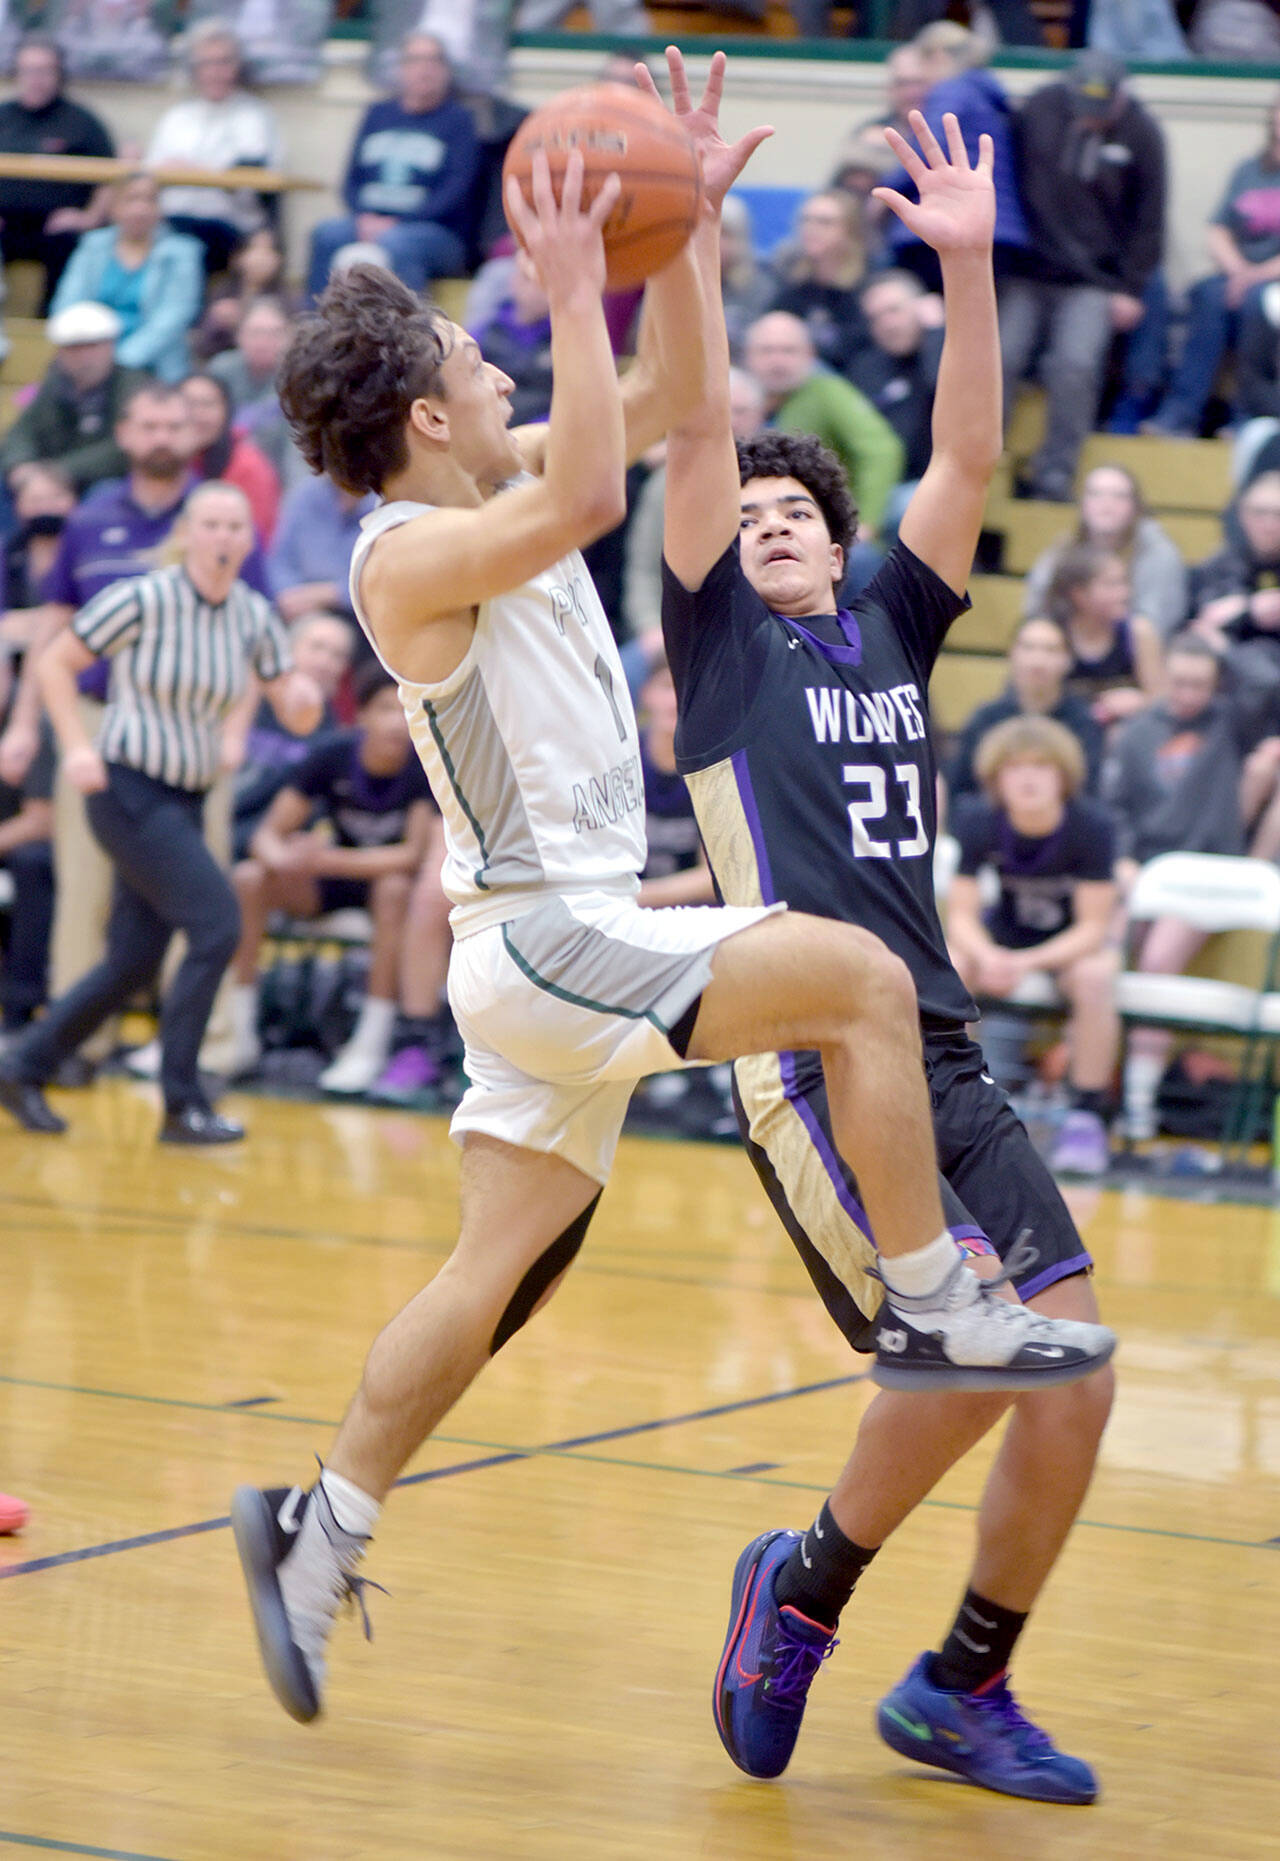 KEITH THORPE/PENINSULA DAILY NEWS Port Angeles’ Kason Albaugh, left, looks for the layup as Sequim’s Jerico Julmist defends the lane on Tuesday at Port Angeles High School.